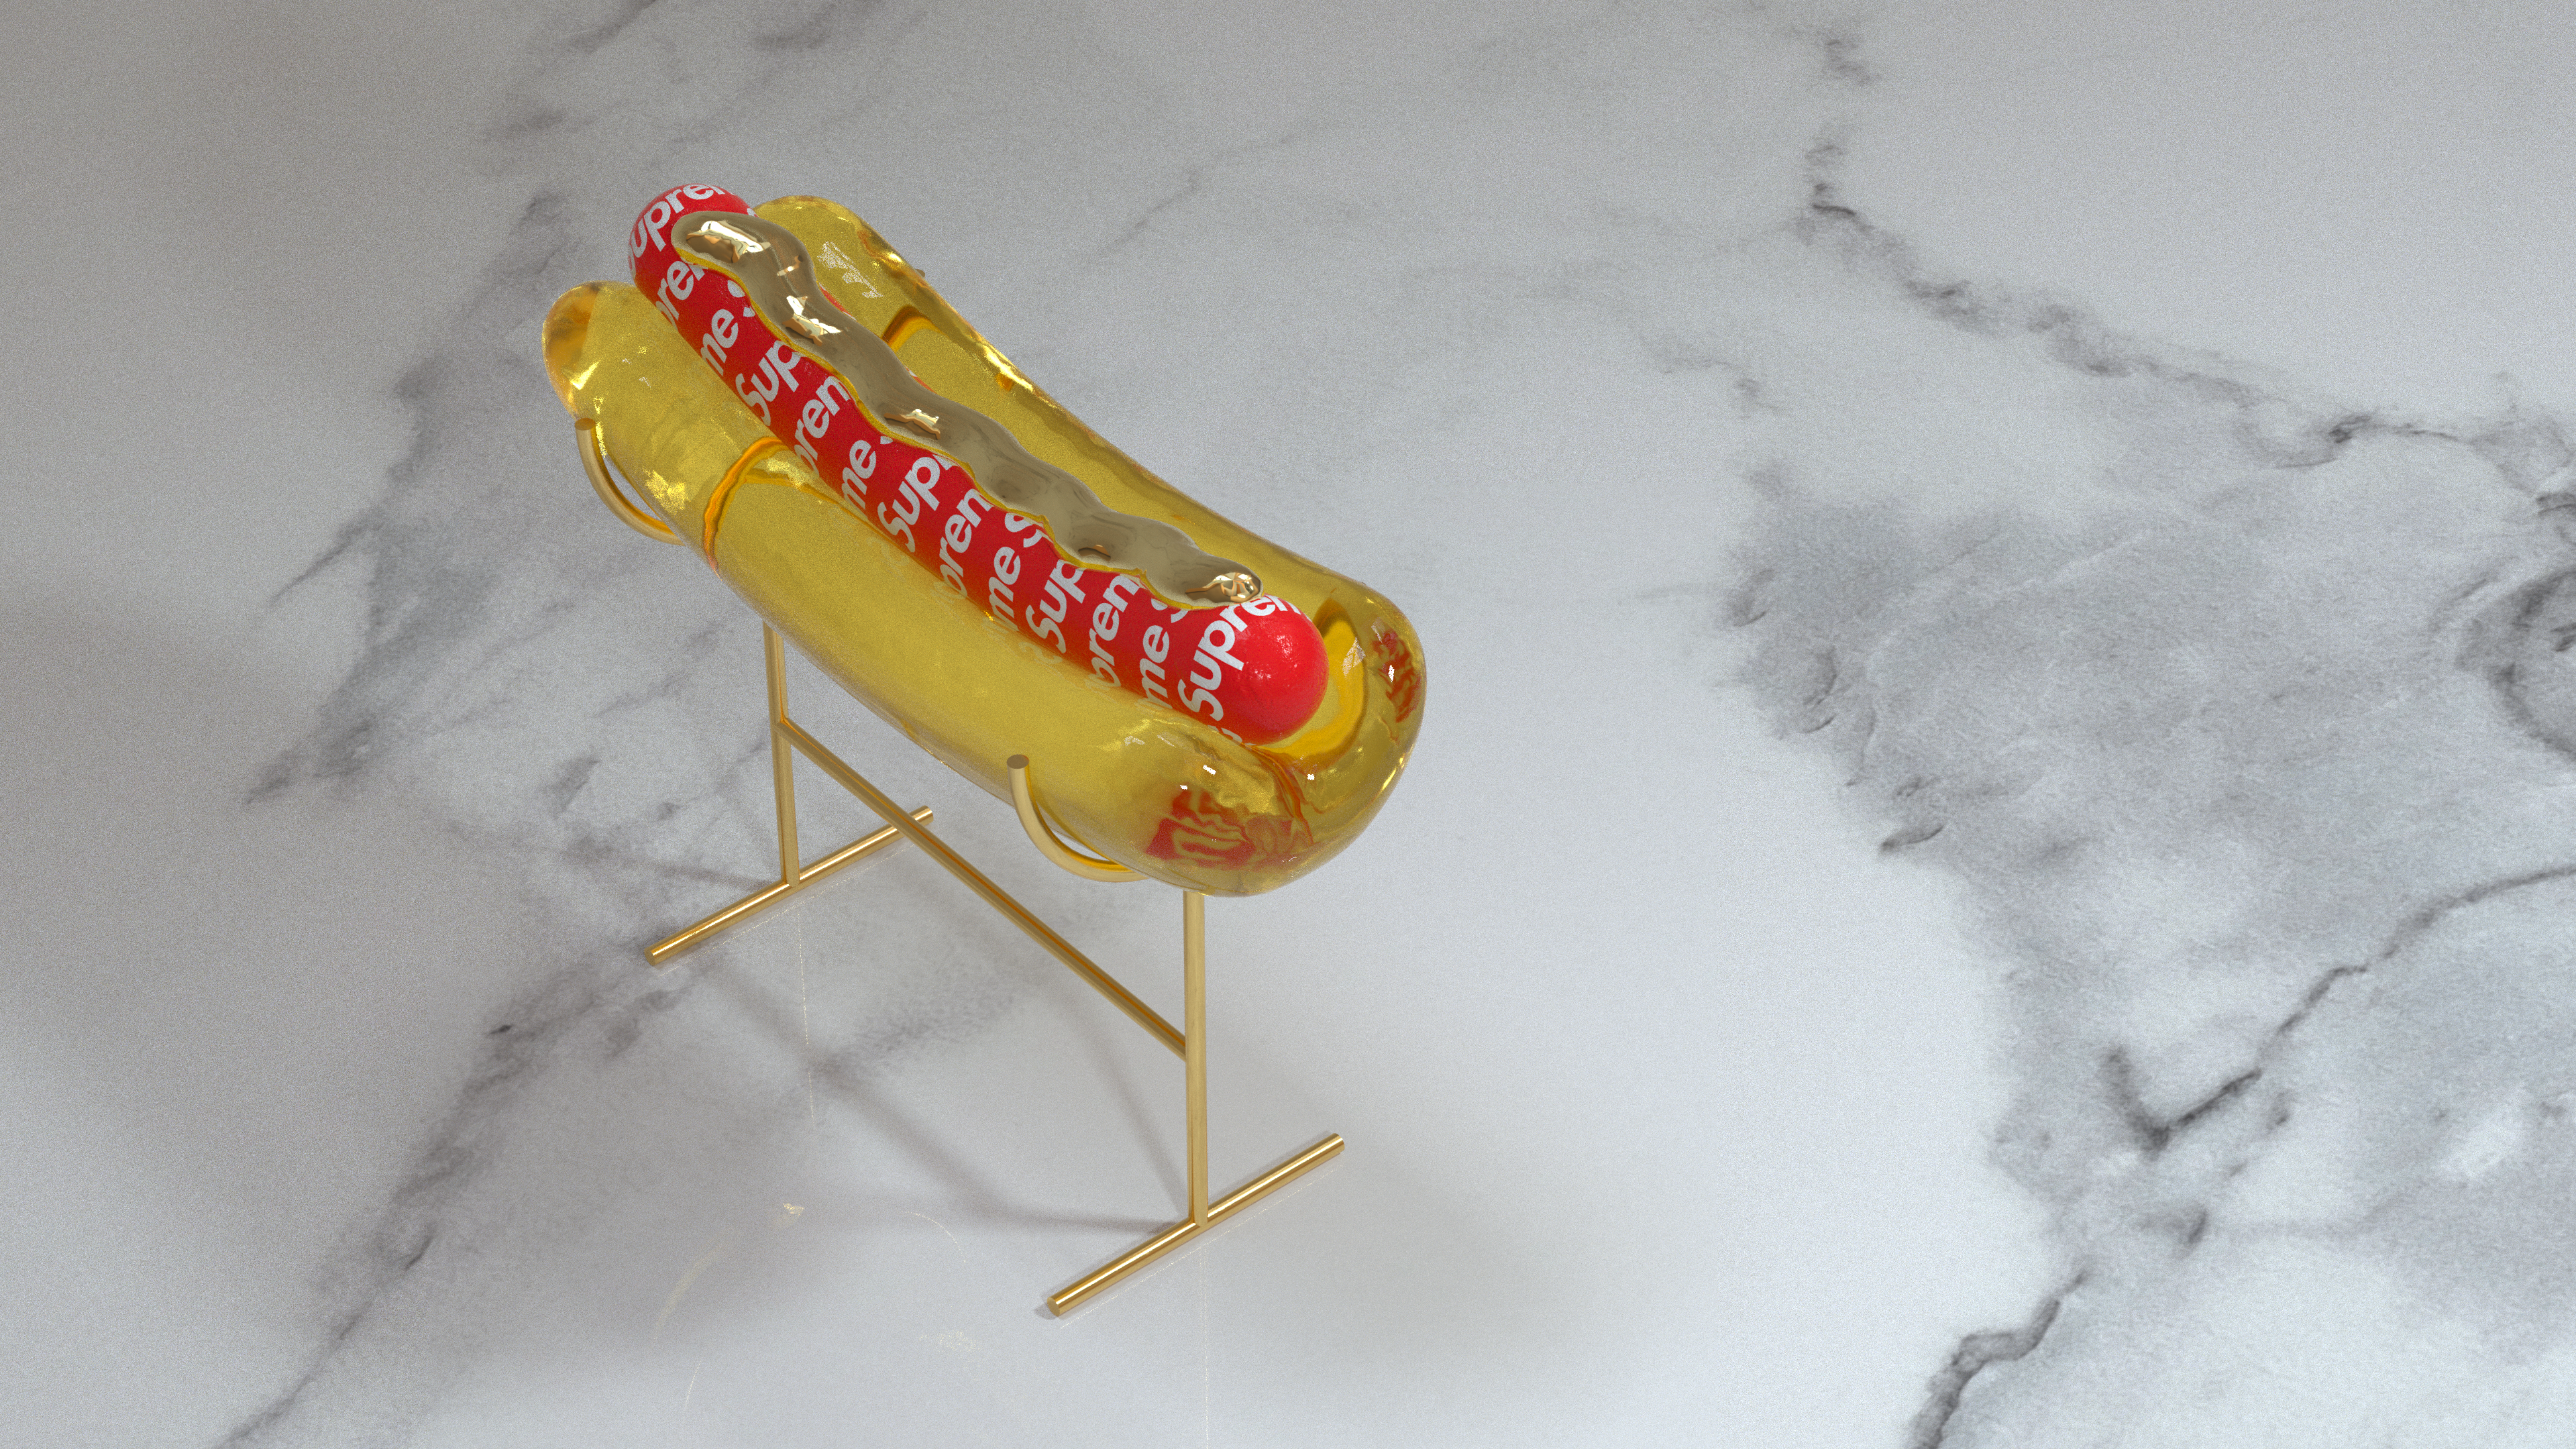 General 3840x2160 Octane hot dogs supreme marble glass shiny Cinema 4D